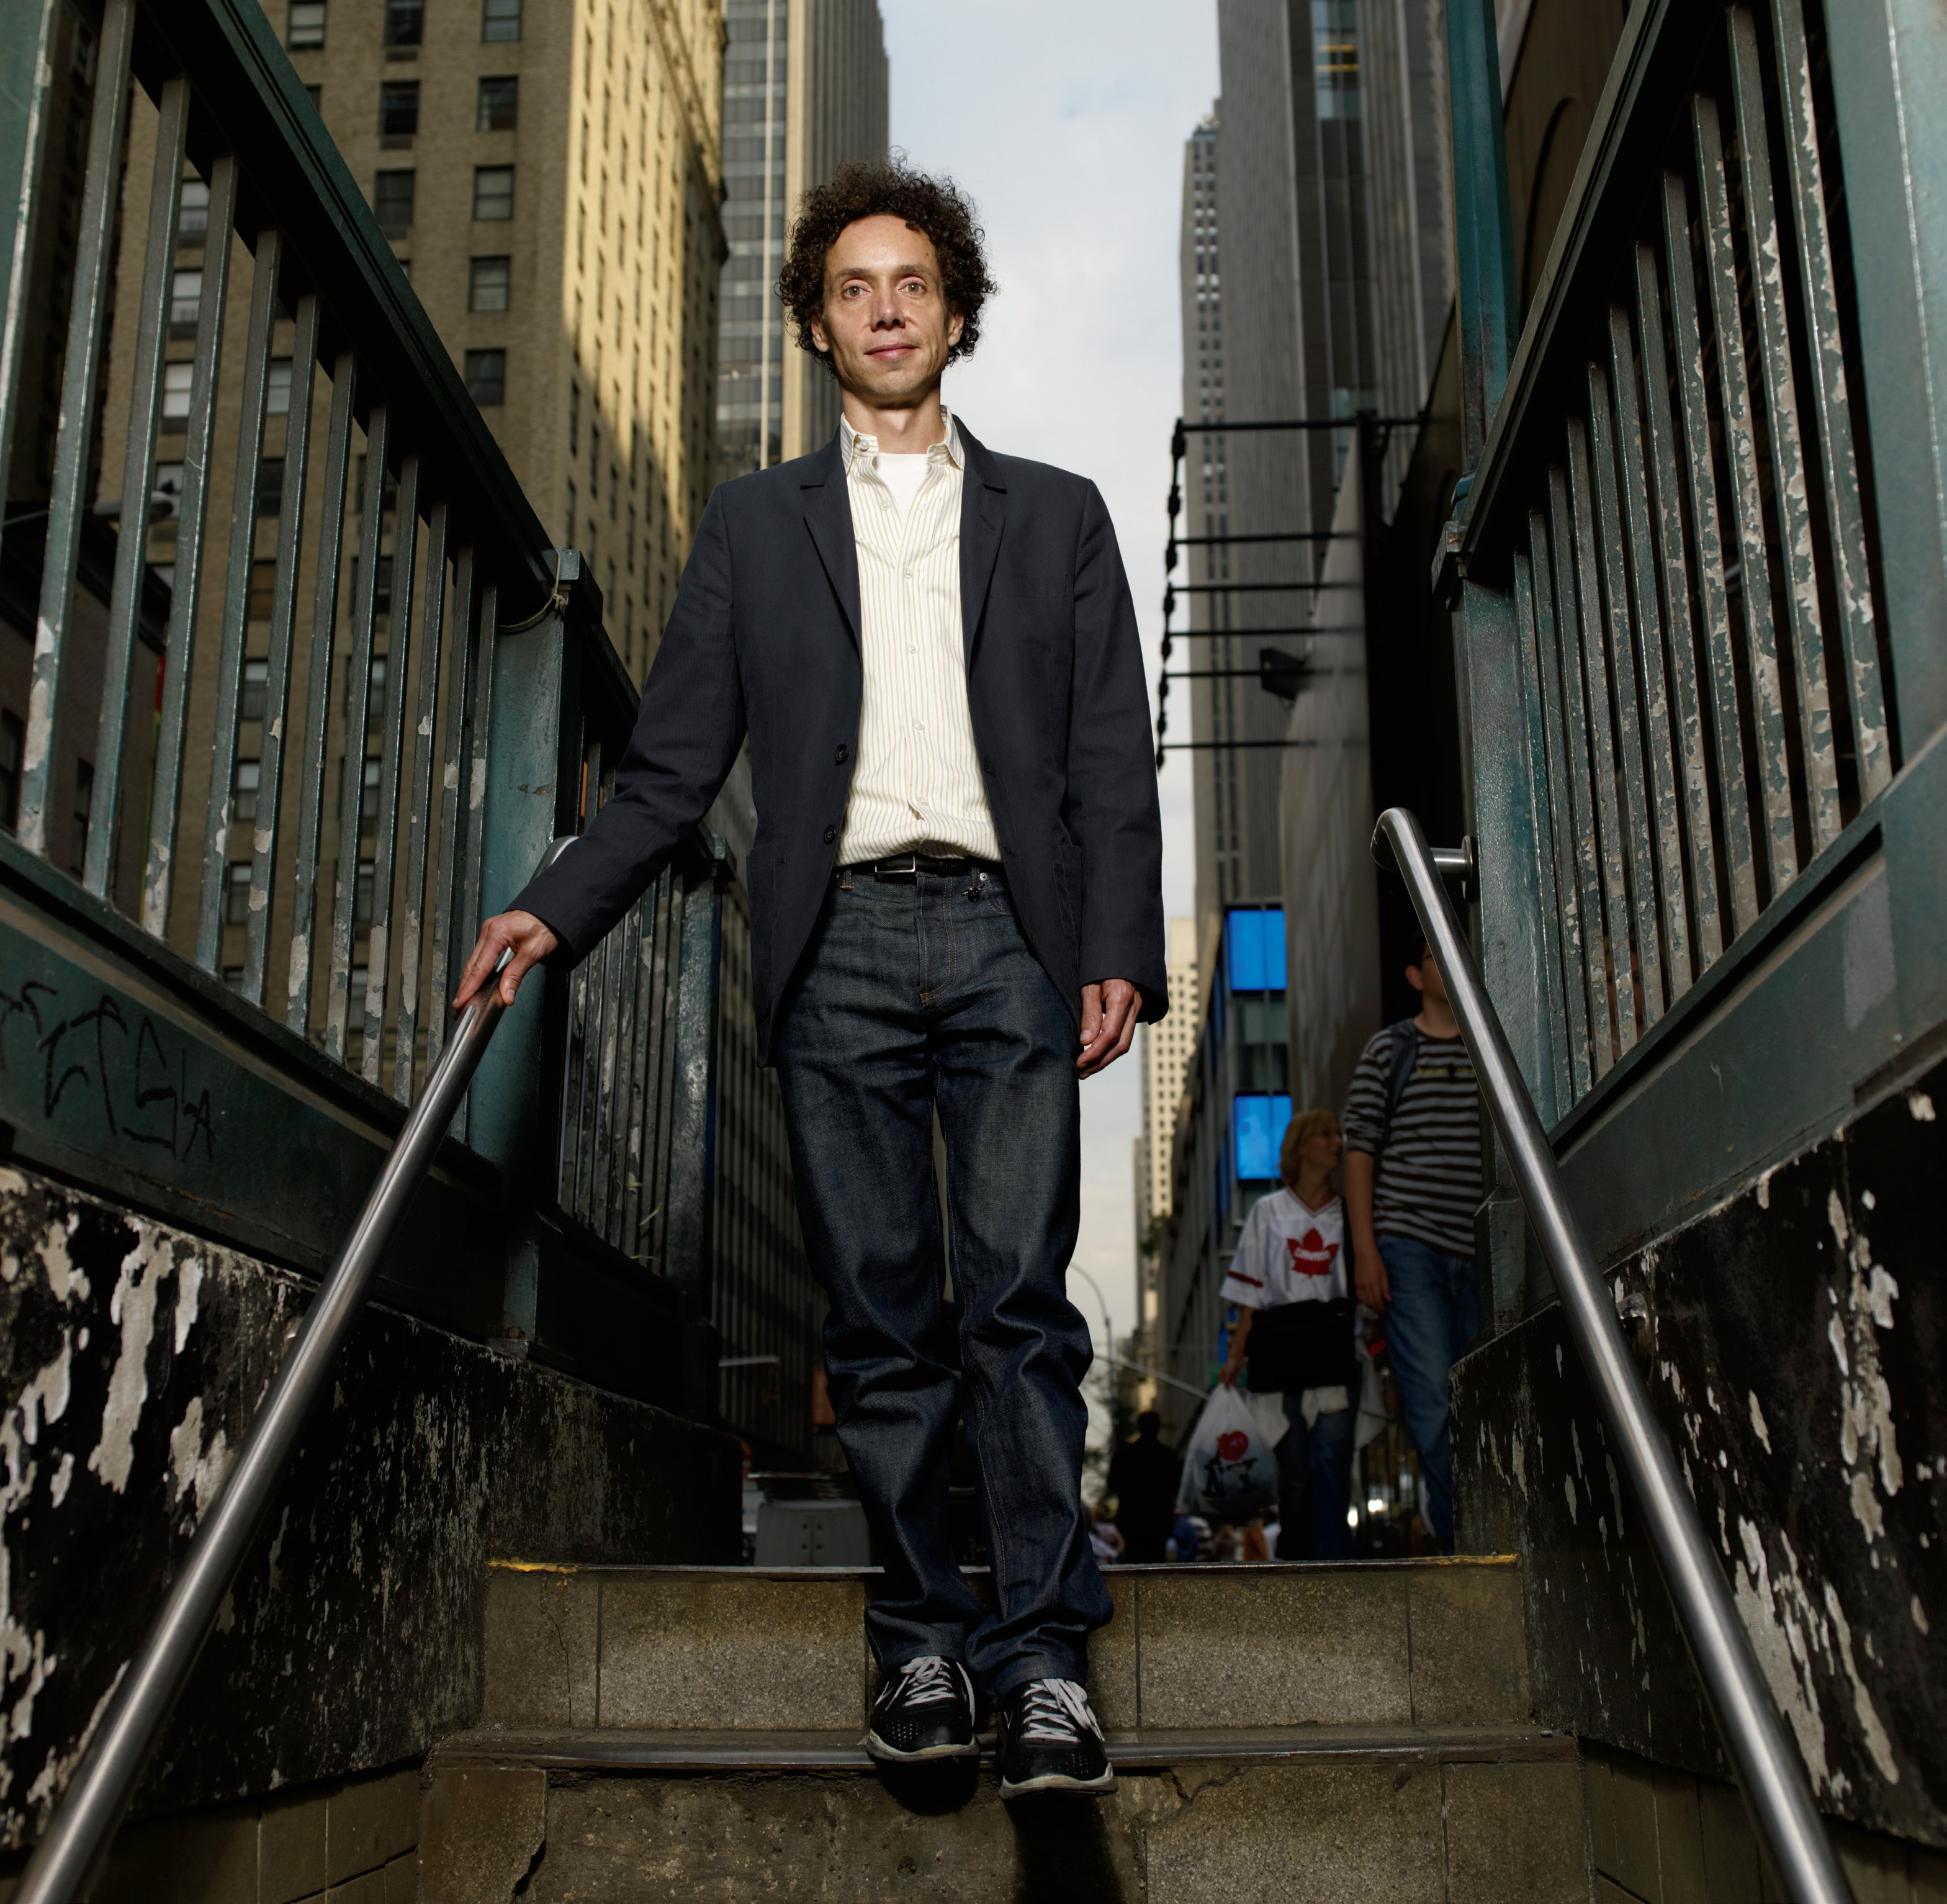 A photo of world-renowned writer Malcolm Gladwell. Malcolm is walking down a set of stairs in the city.